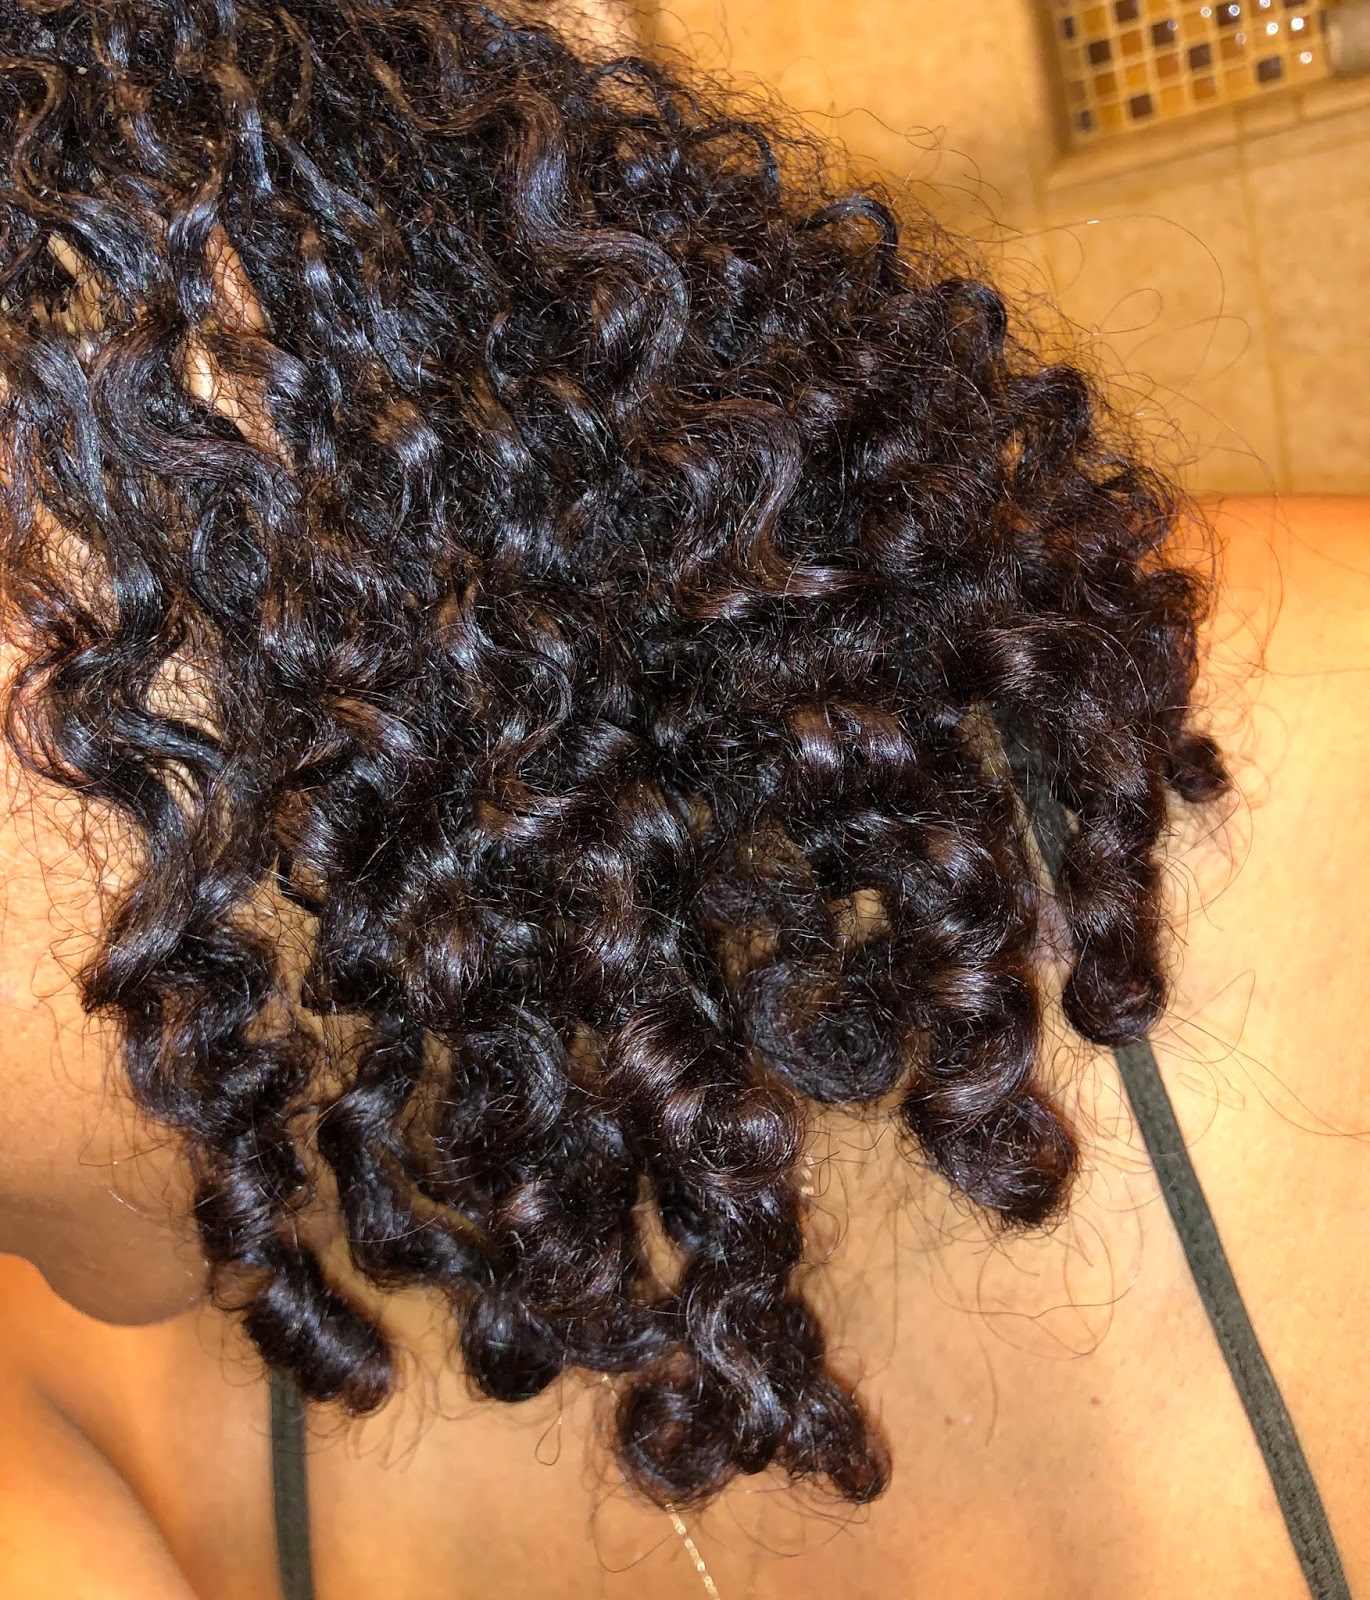 Natural Hair 101: How to Find Your Hair Type and Texture | The Mane  Objective